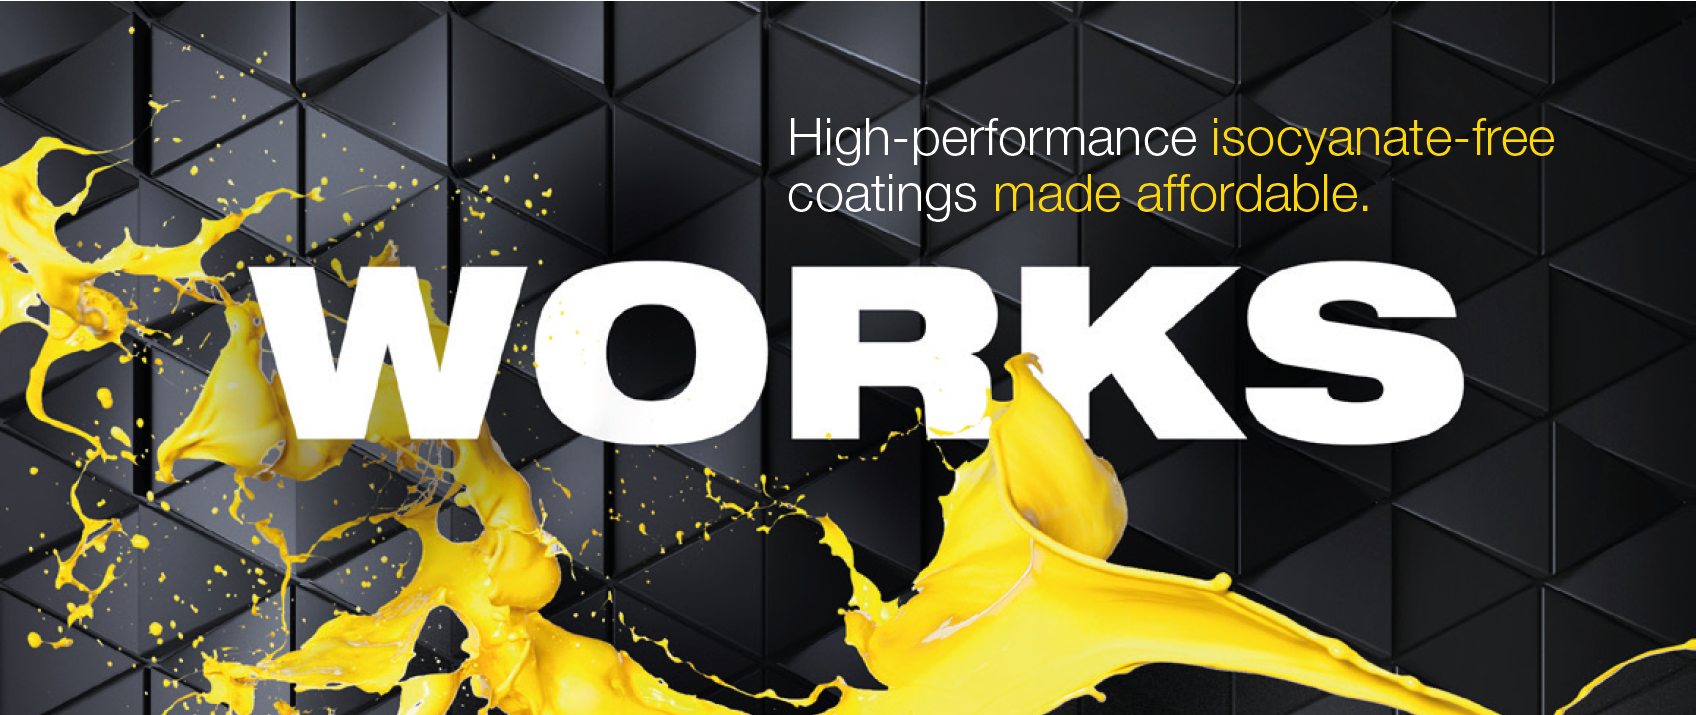 High-performance isocyanate-free coatings made affordable.